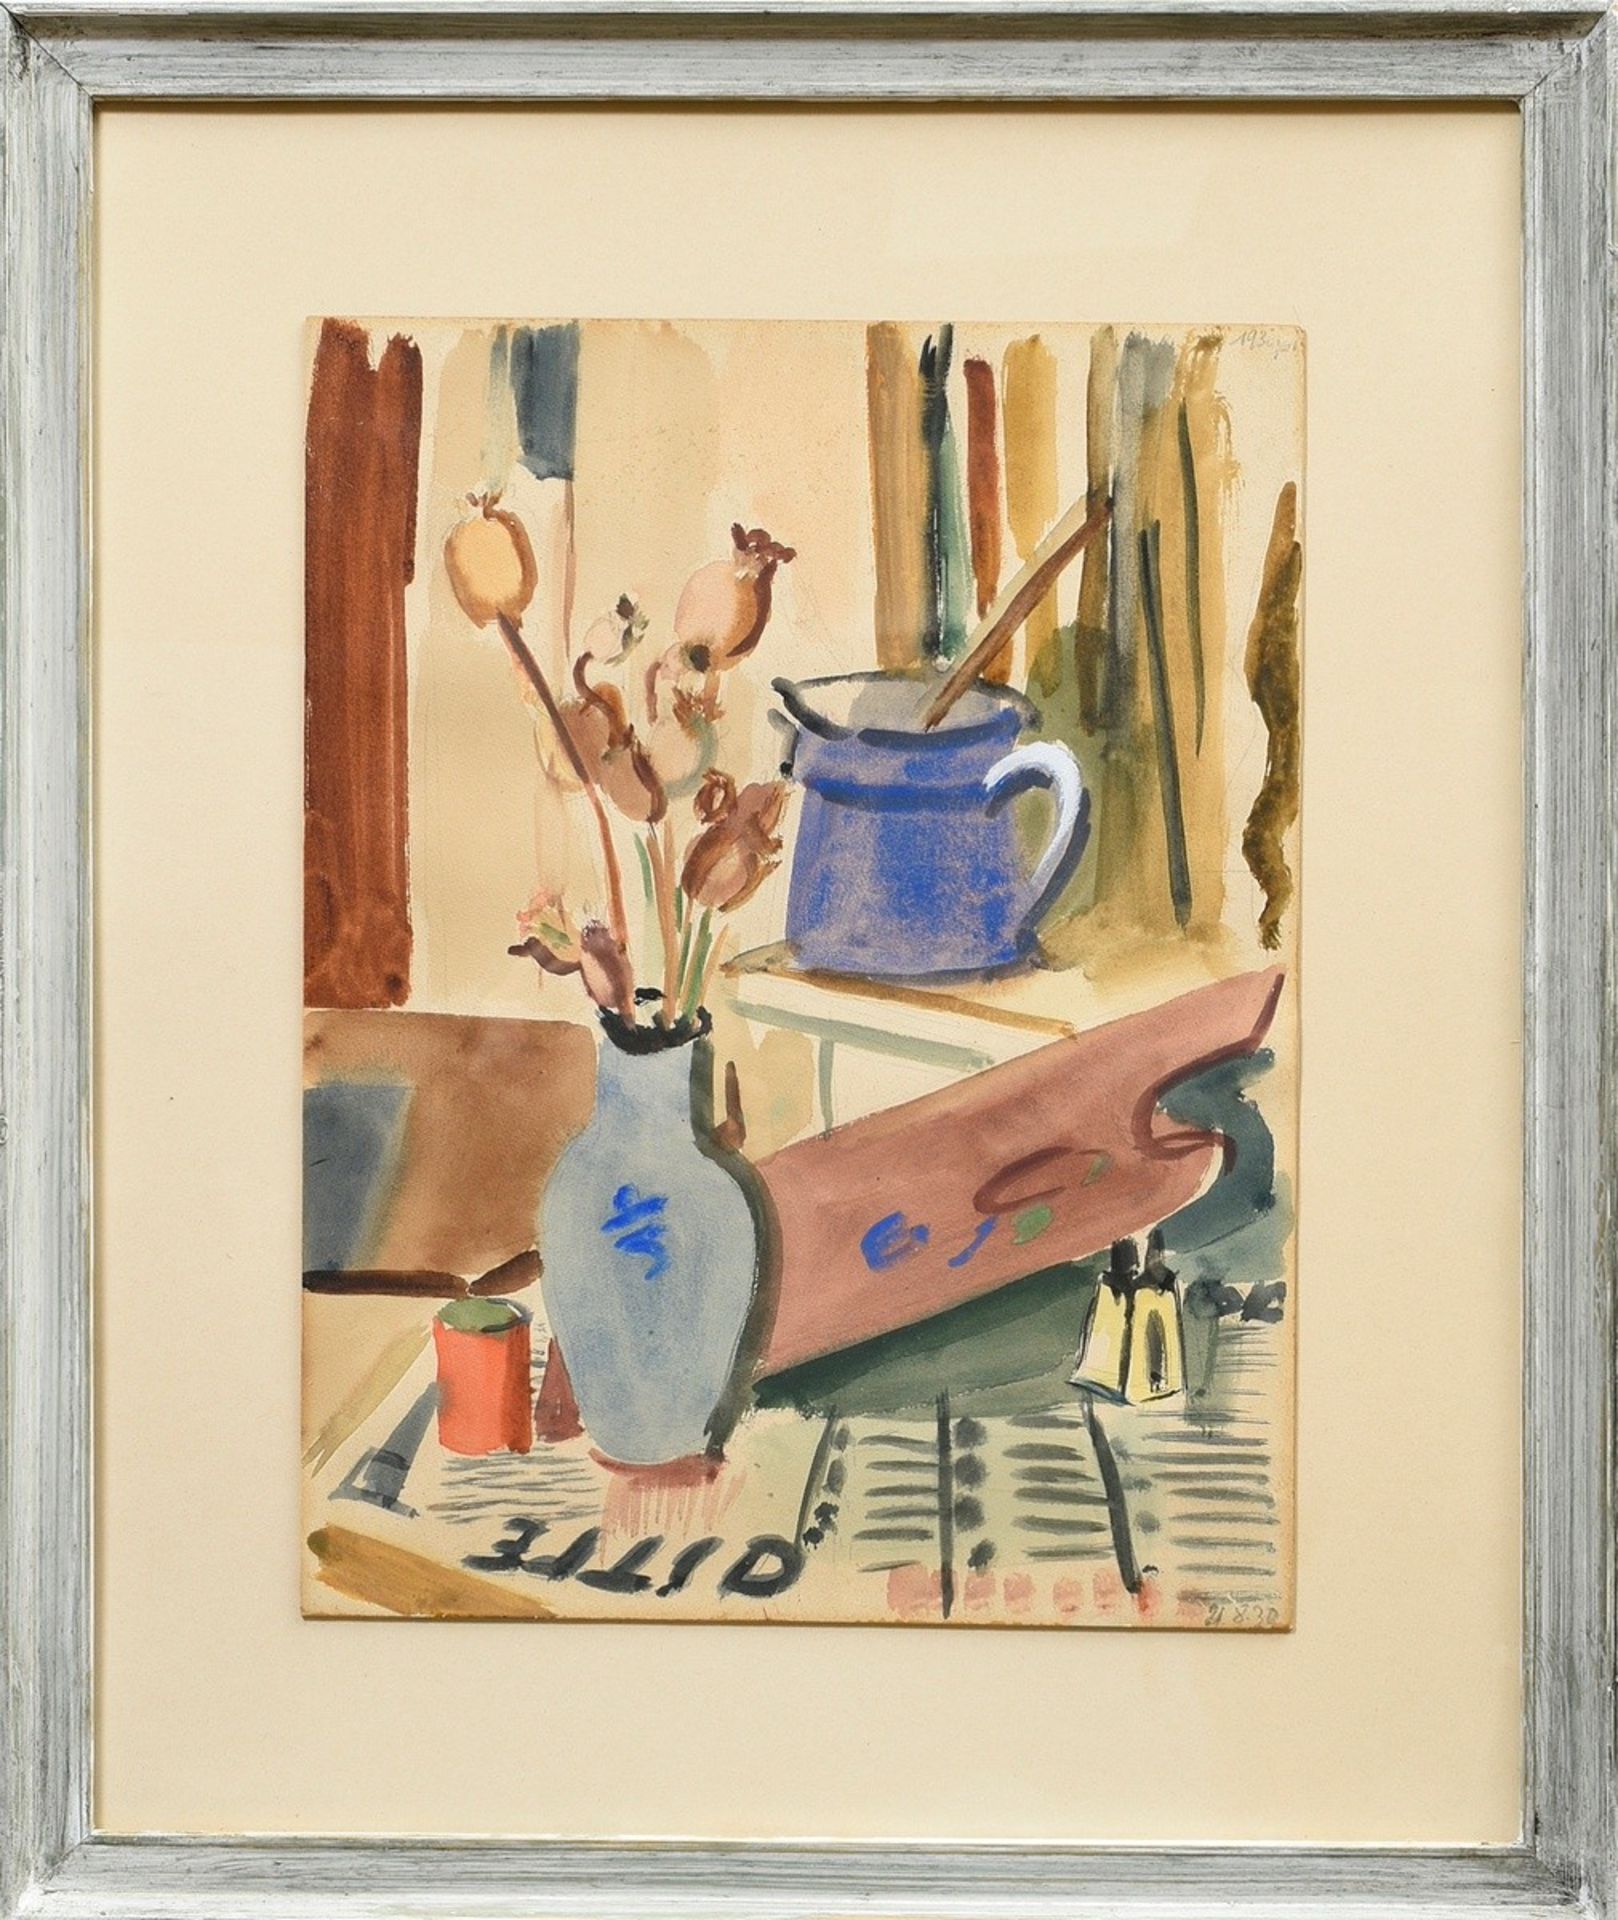 Hartmann, Erich (1886-1974) "Vase with poppy capsules and milk jug" 1930, pencil/watercolour/pastel - Image 2 of 5